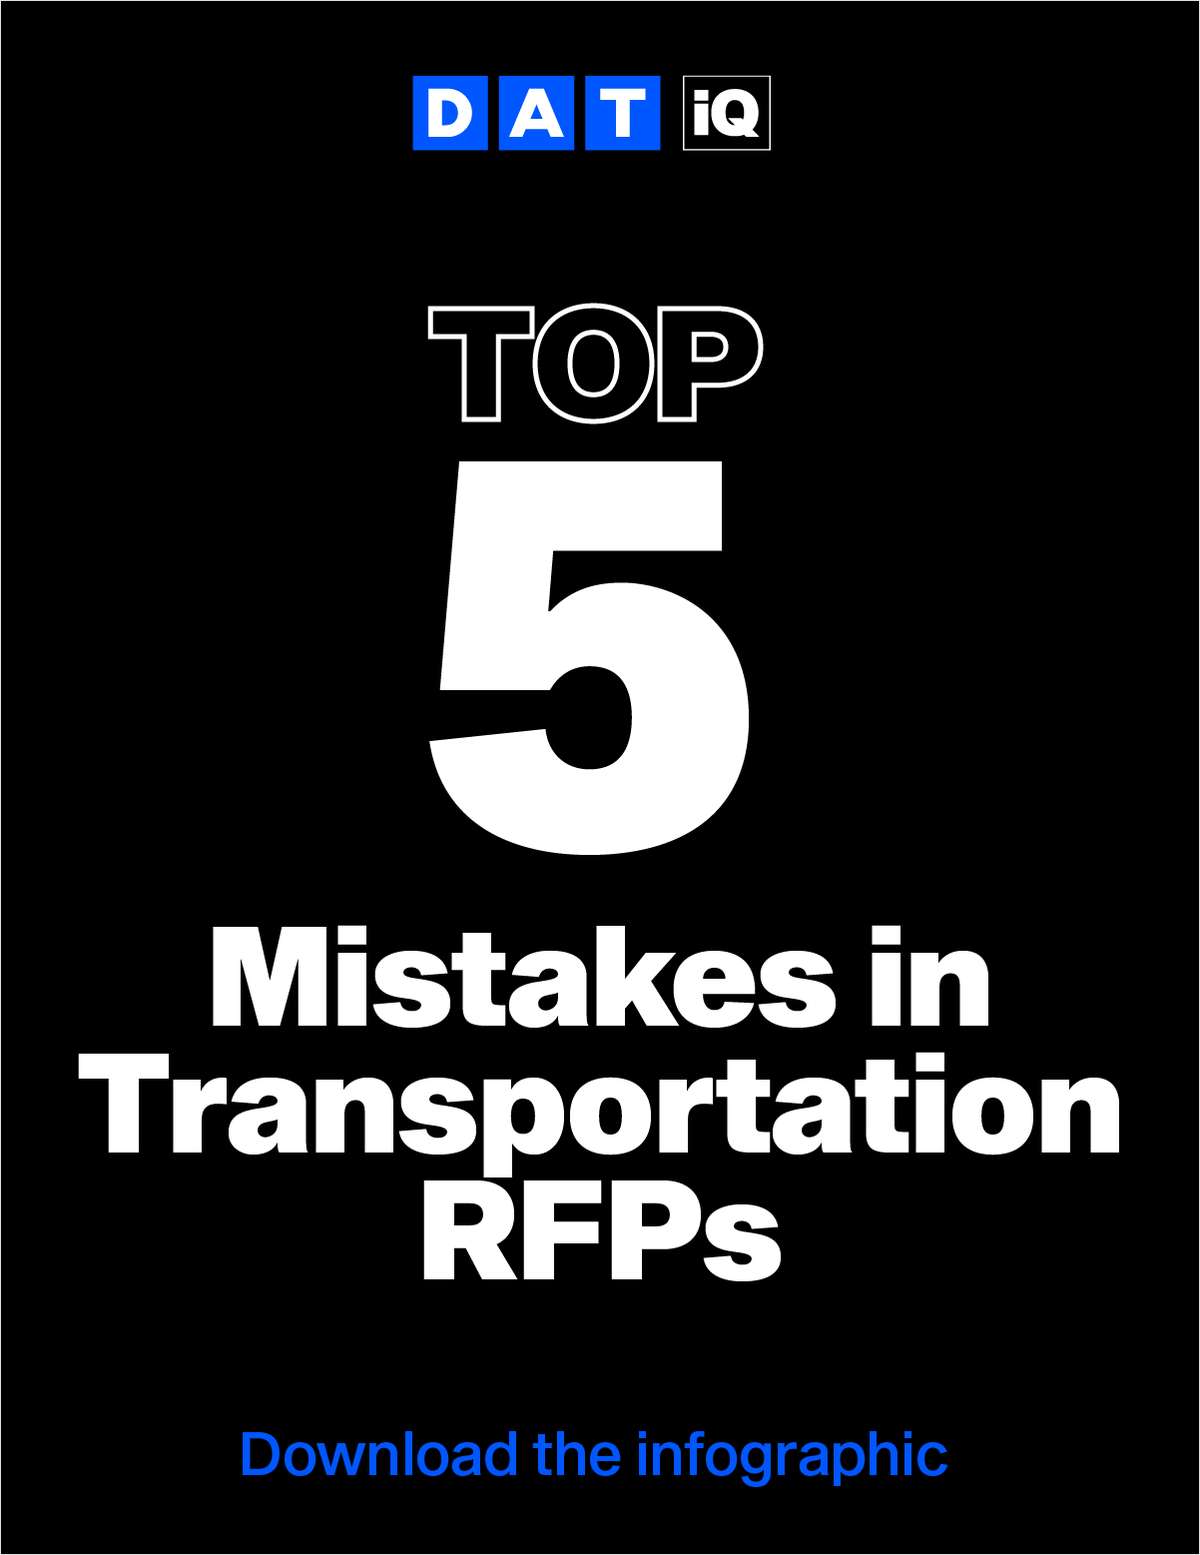 Top 5 RFP Mistakes Infographic